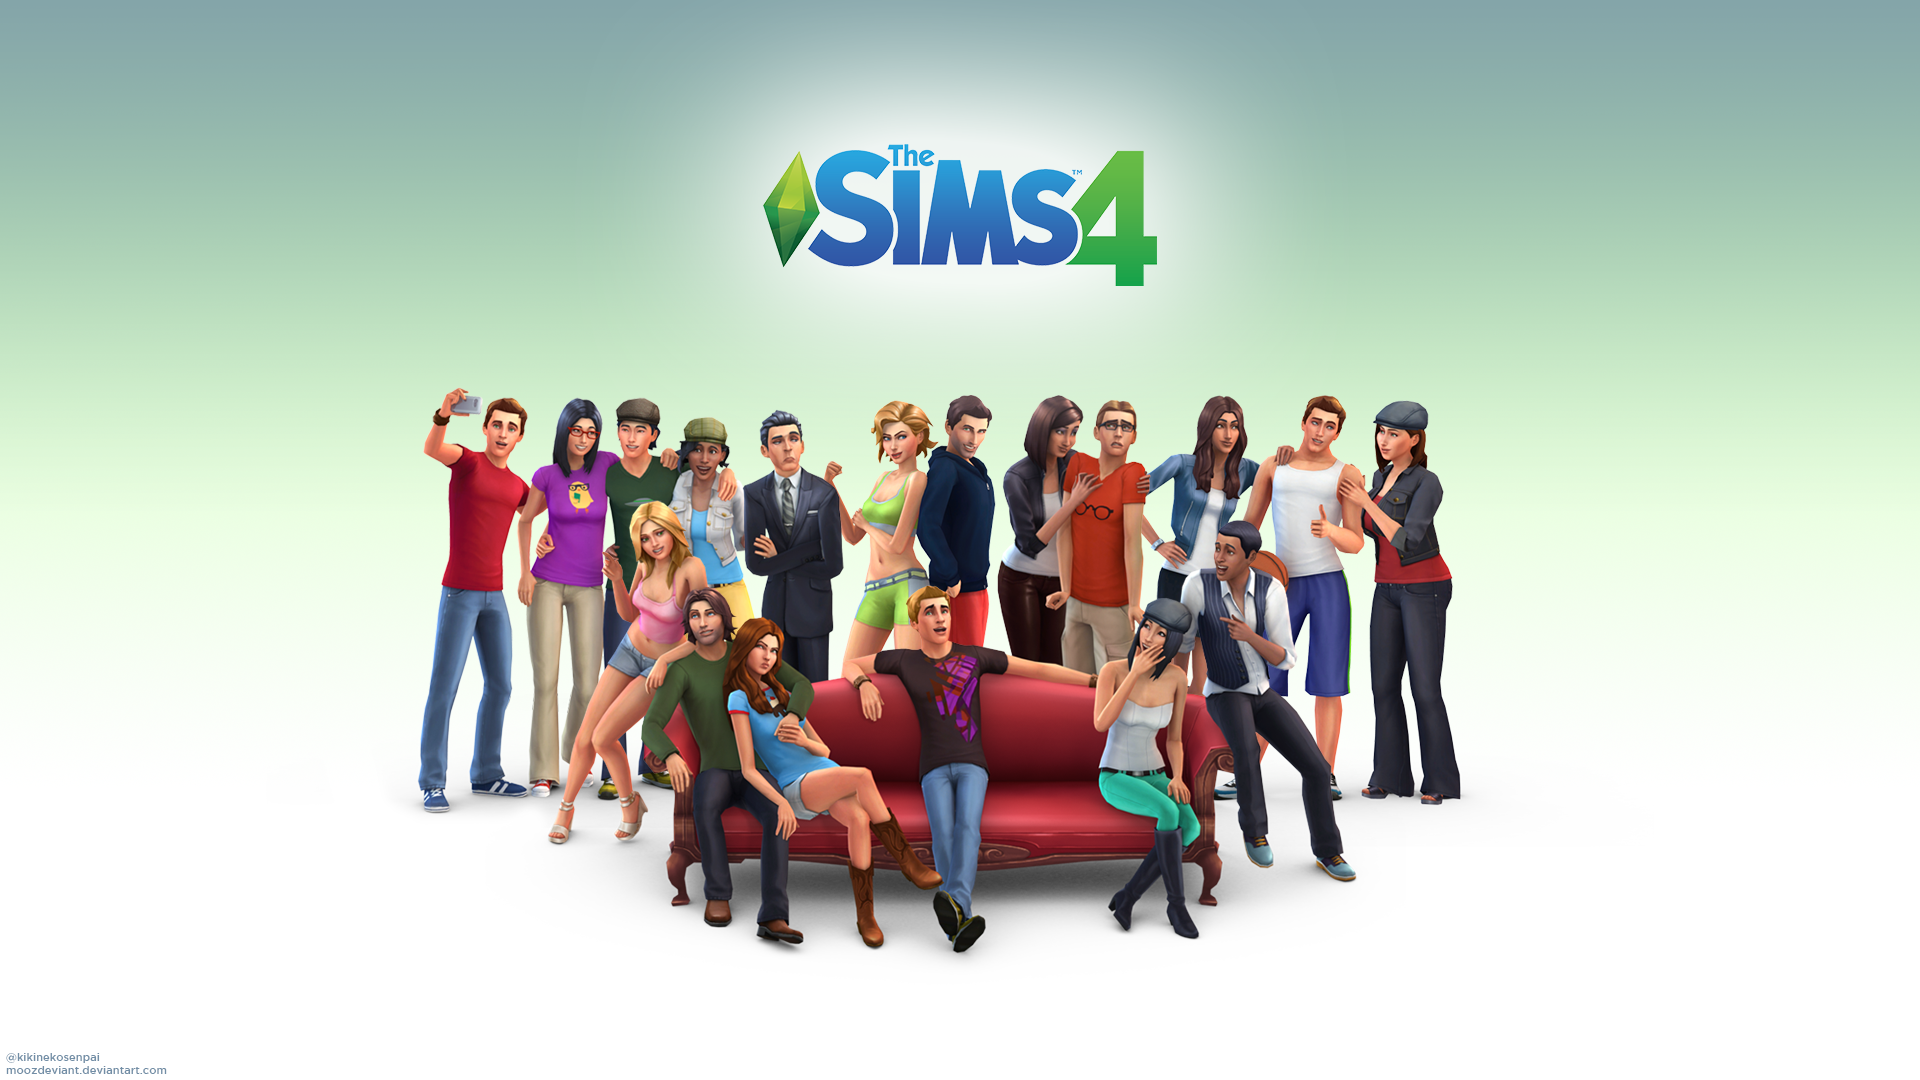 The Sims Wallpaper High Resolution